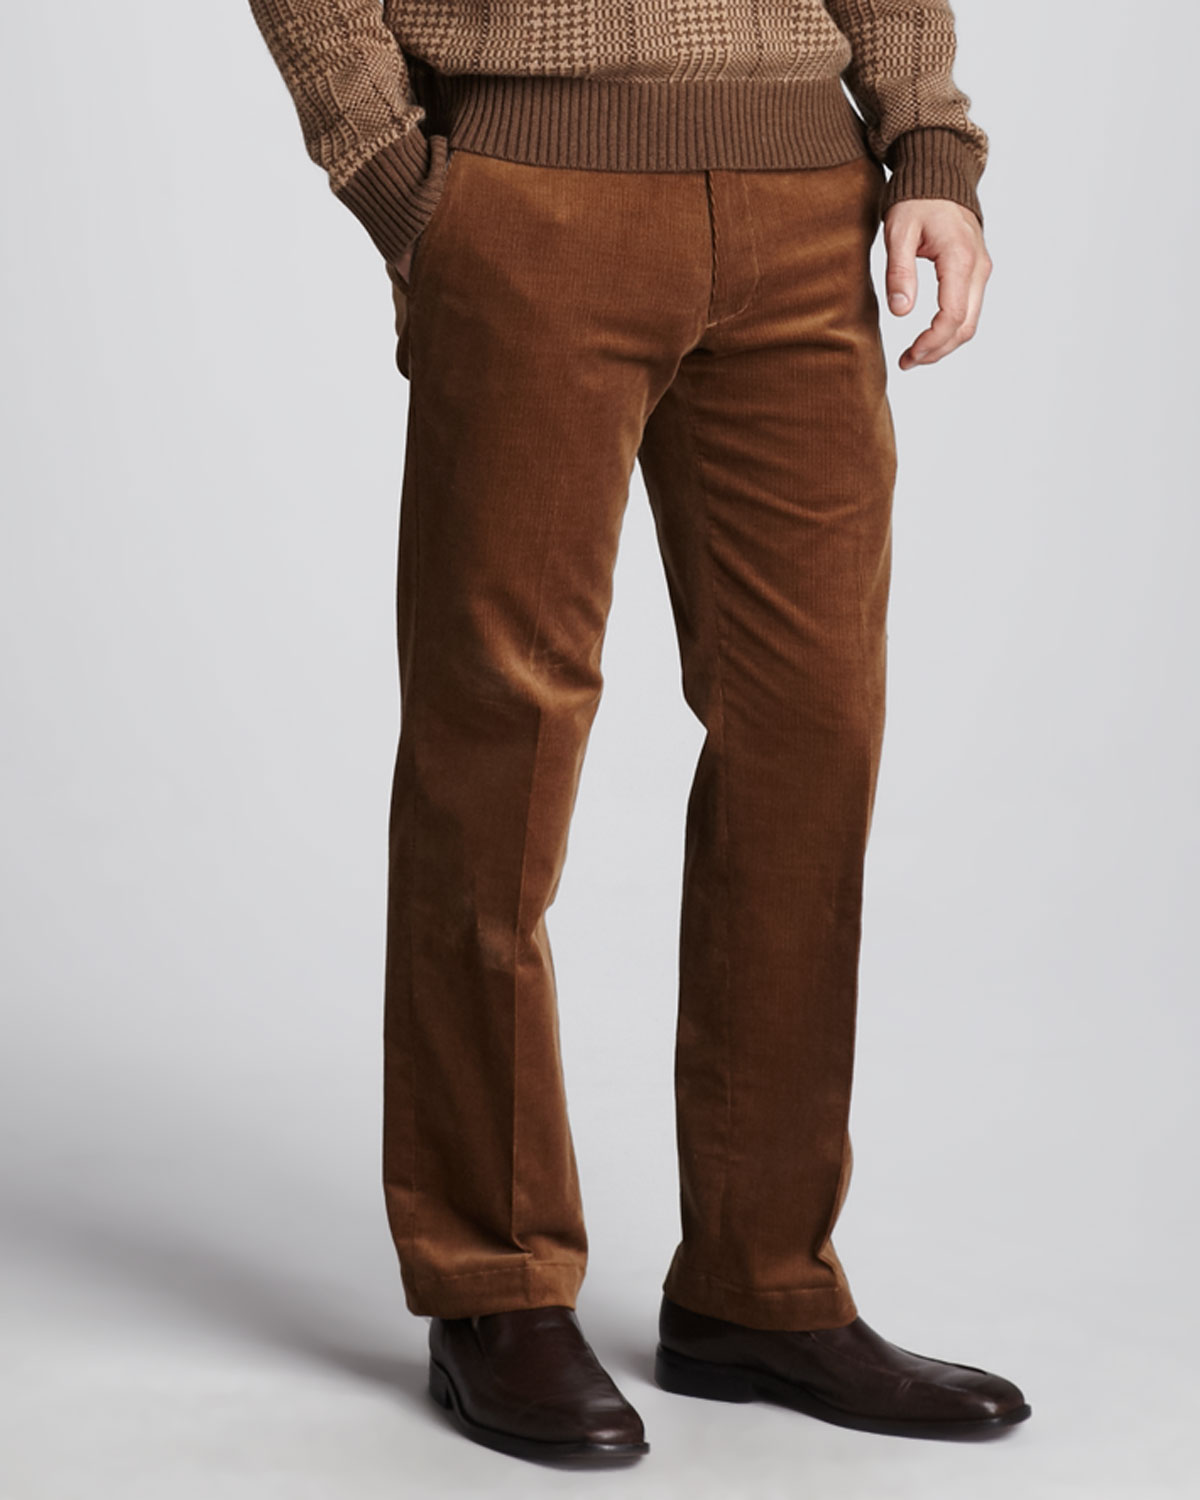 Polo Ralph Lauren Suffield Corduroy Trousers Brown for Men - Lyst